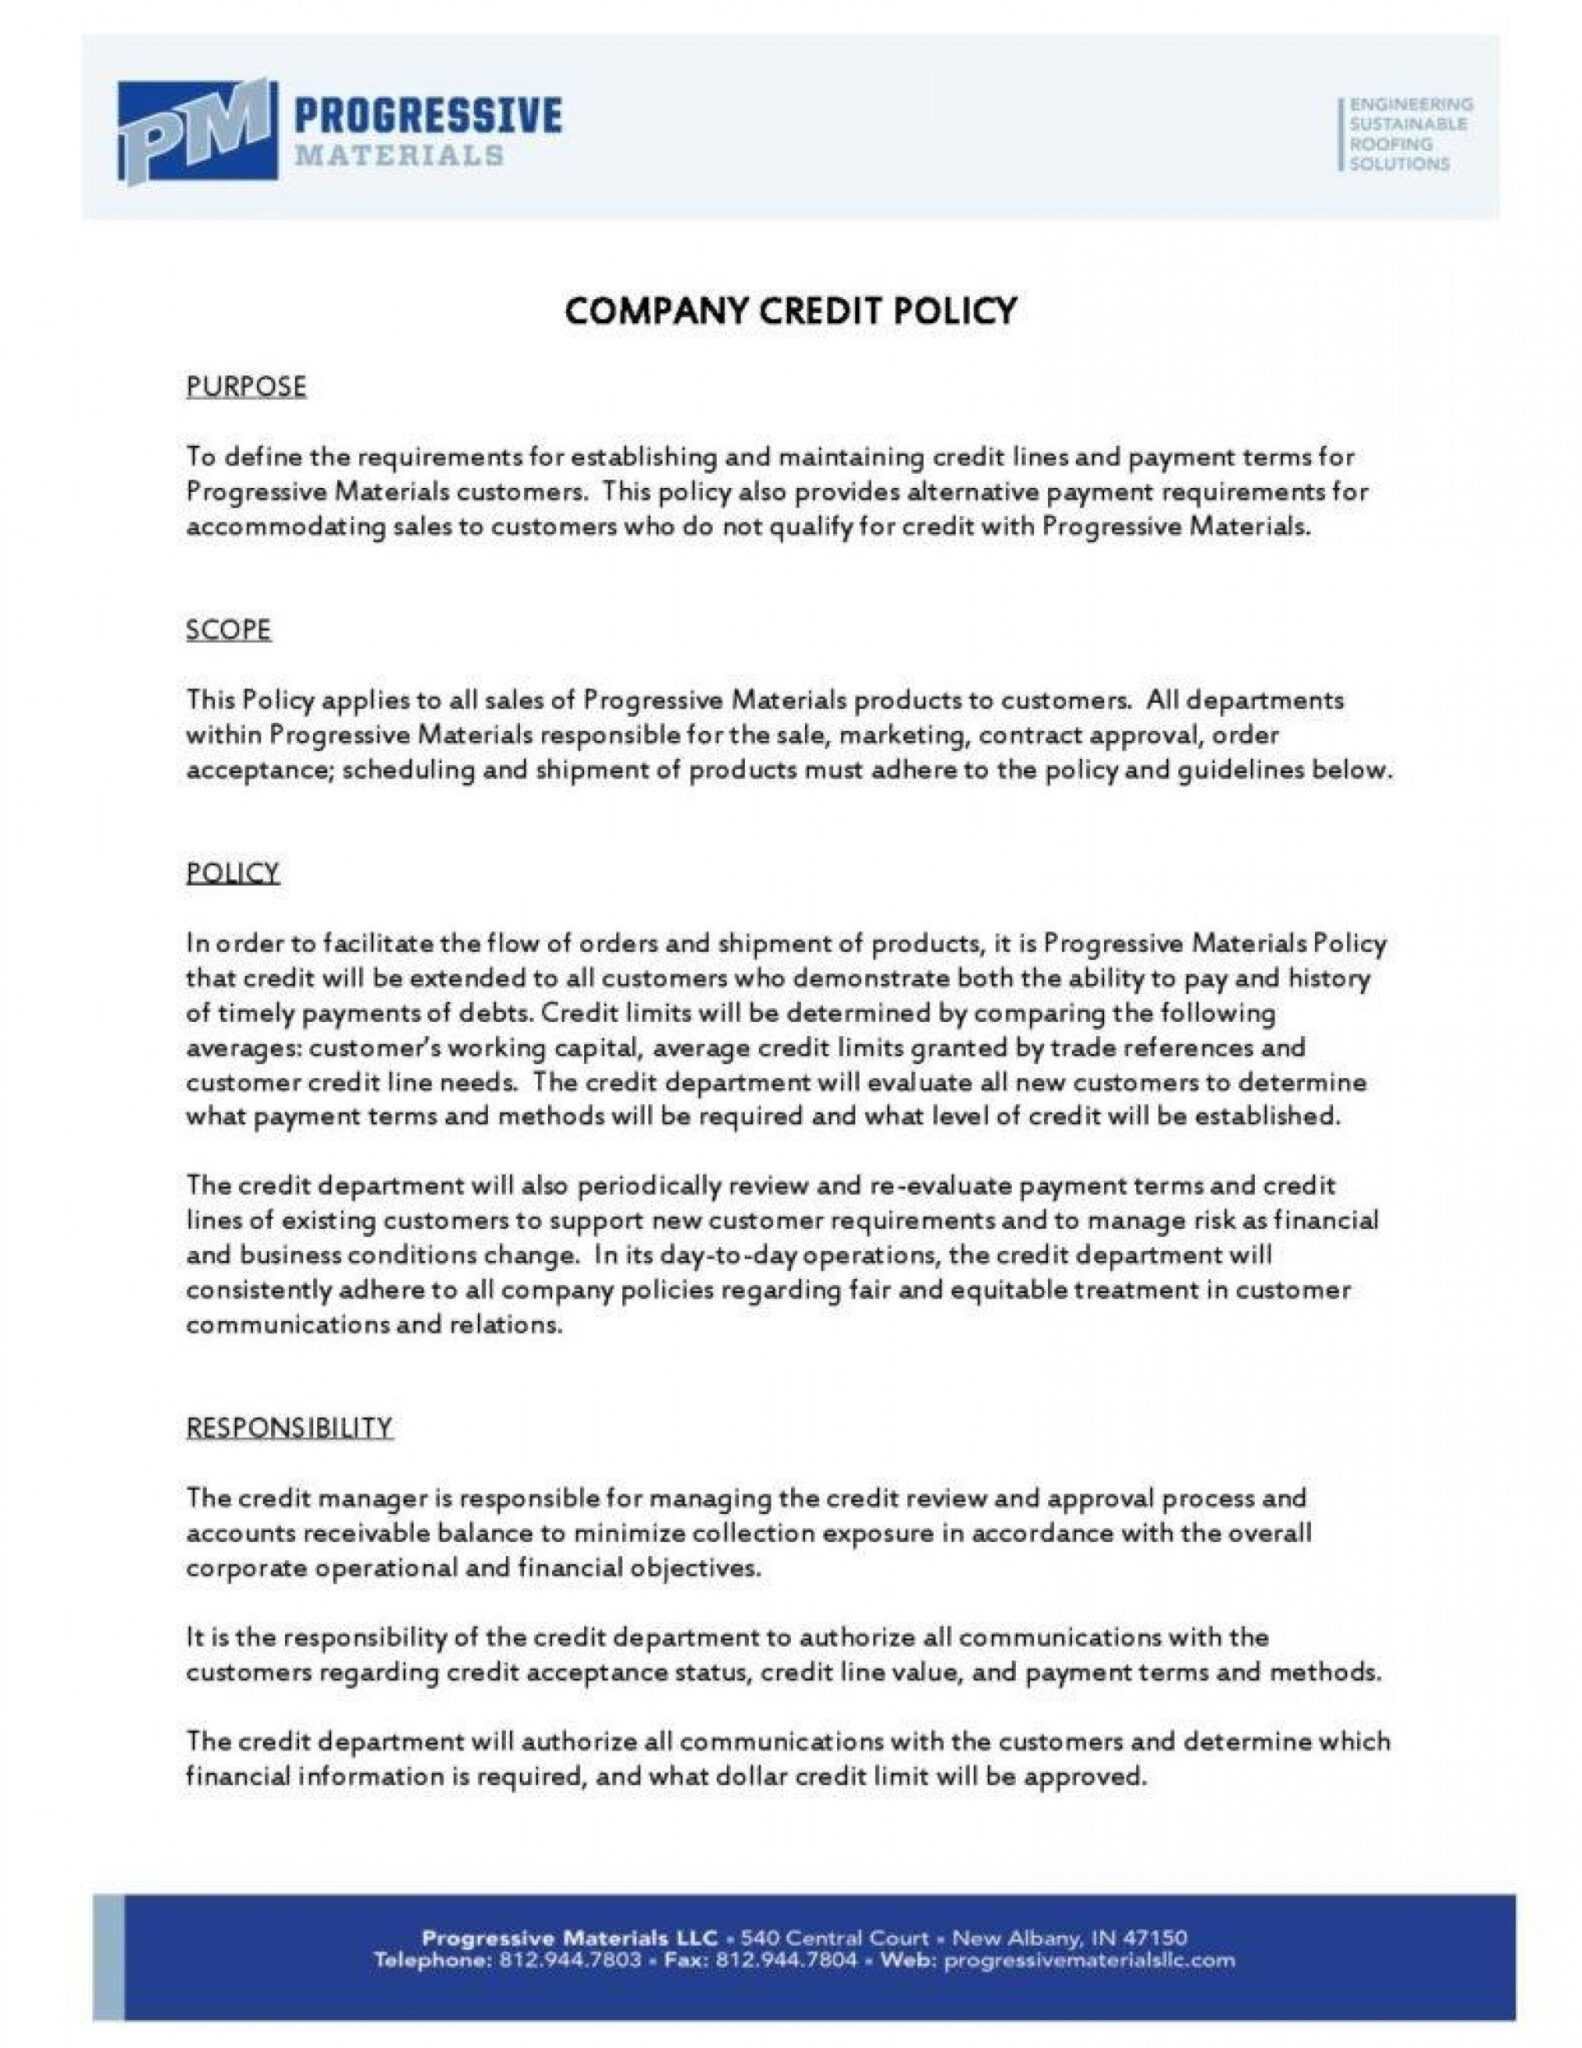 Company Credit Card Policy Template